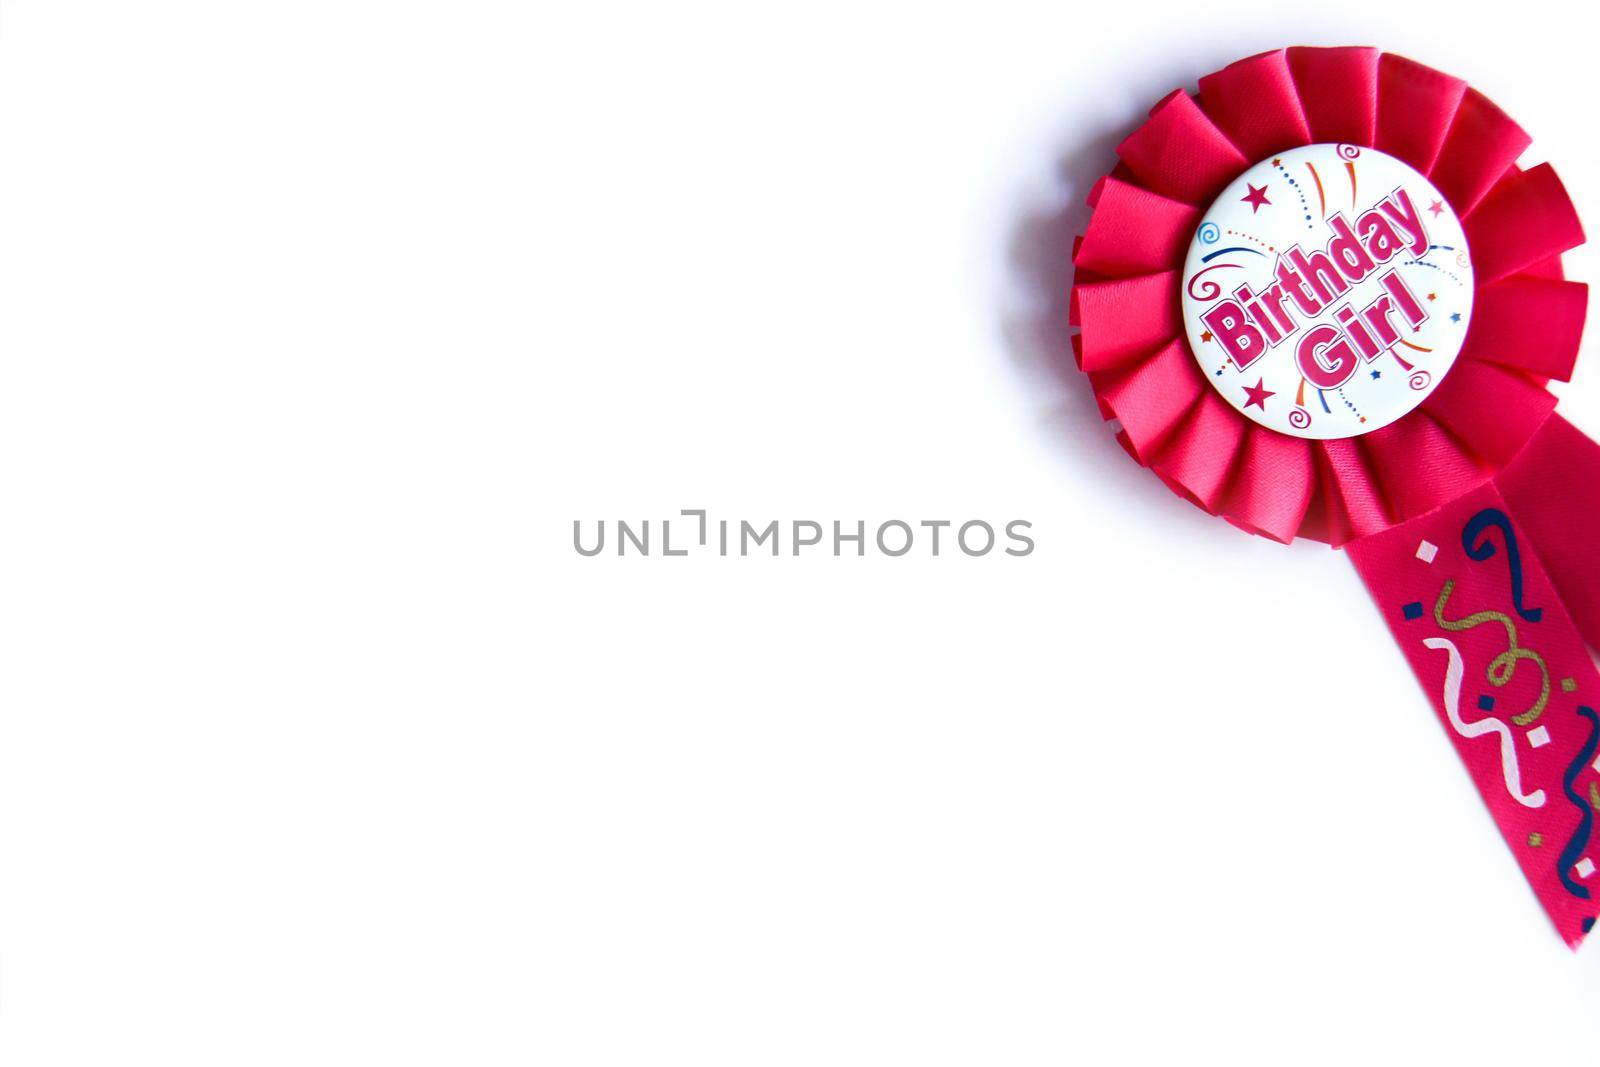 Pink birthday rosette. Happy birthday wishes for a girl on a pink badge on white background by JuliaDorian